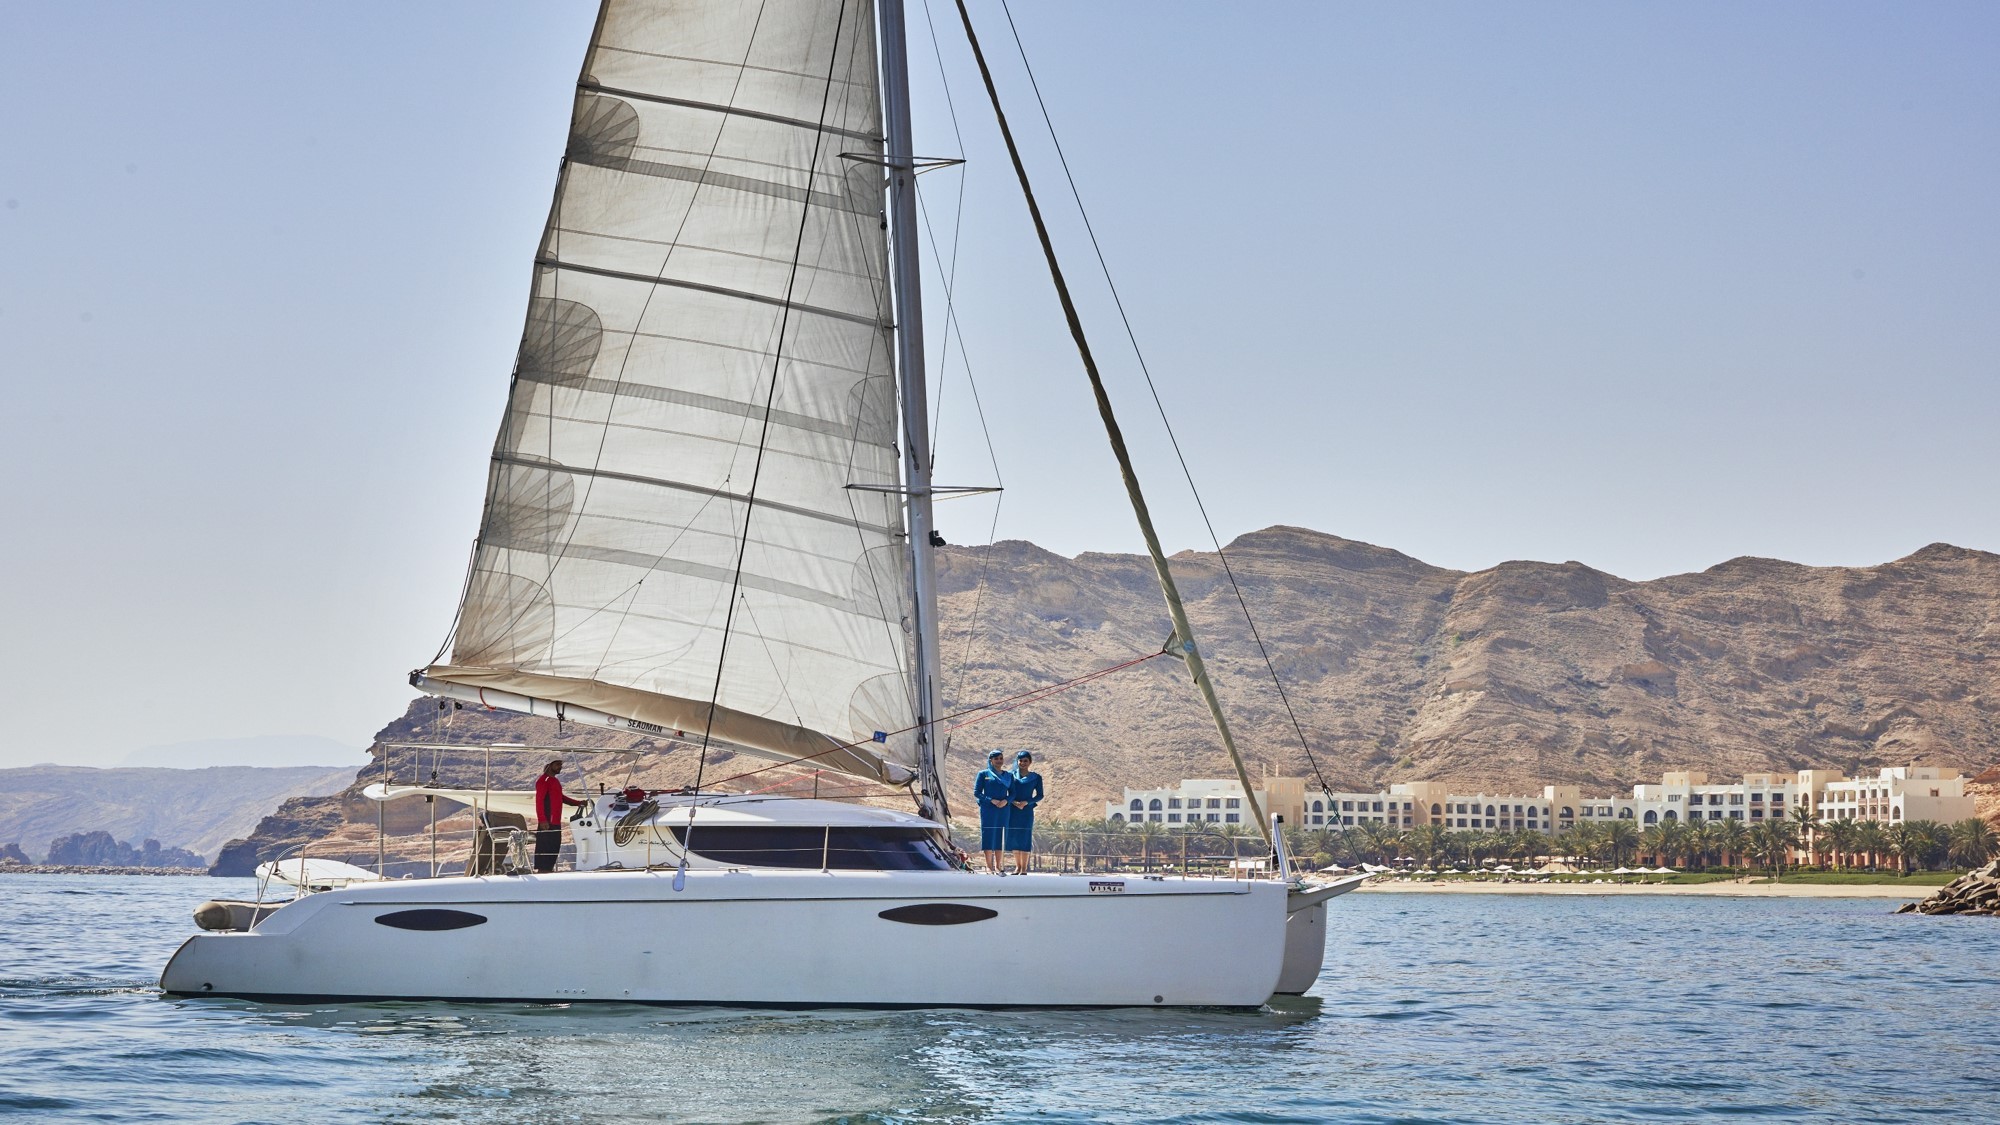 International sailing experience in Oman